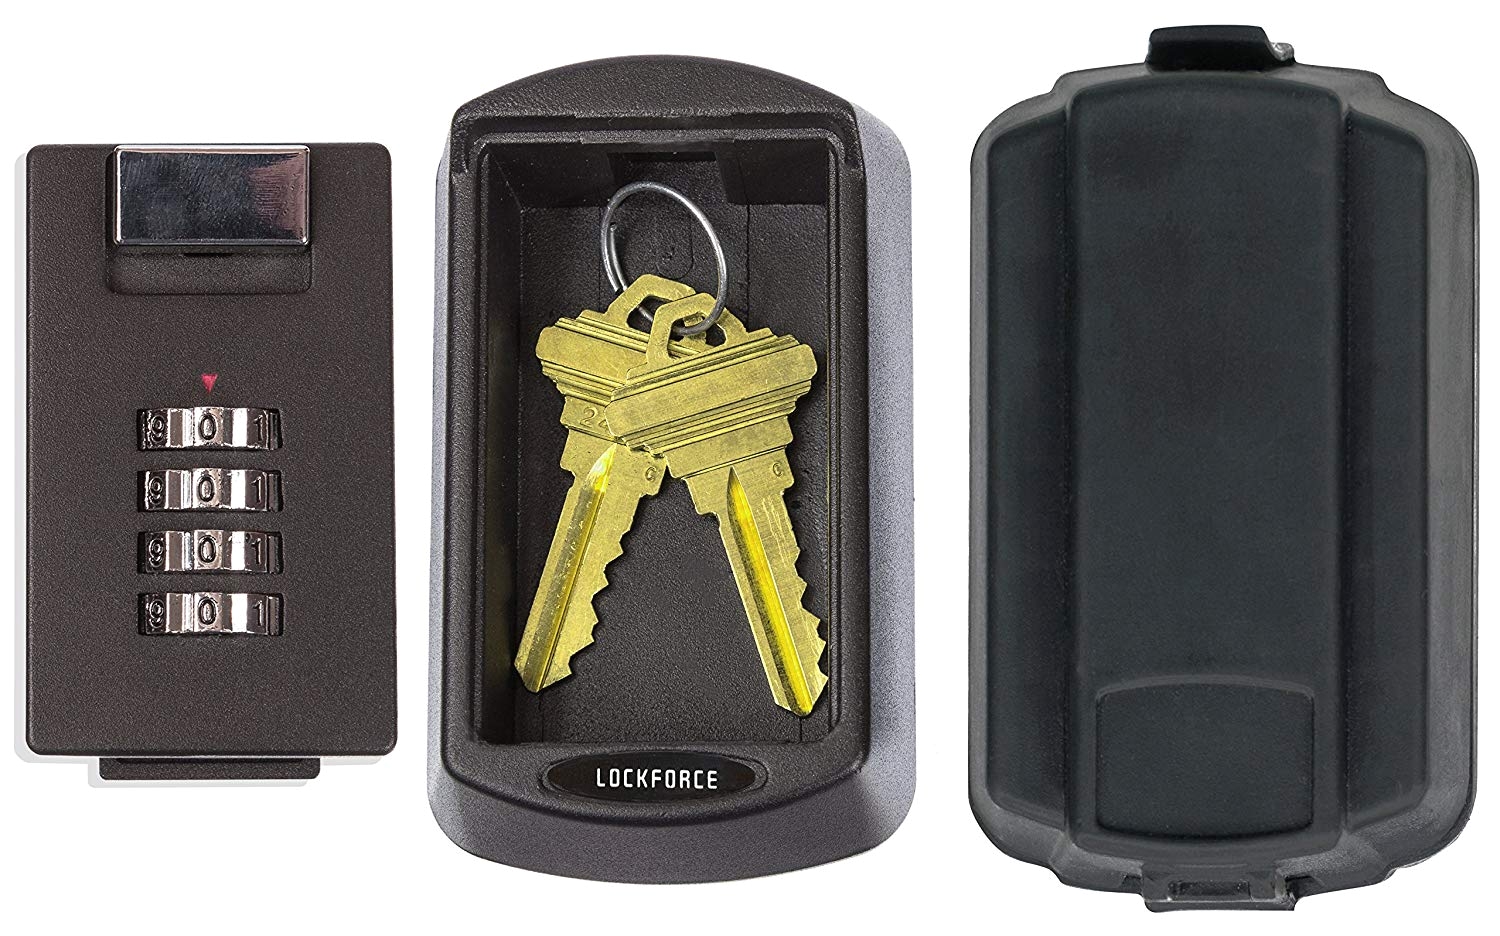 lockforce key lock box waterproof case and premium wall mount kit included master key storage box for outside perfect for realtors family